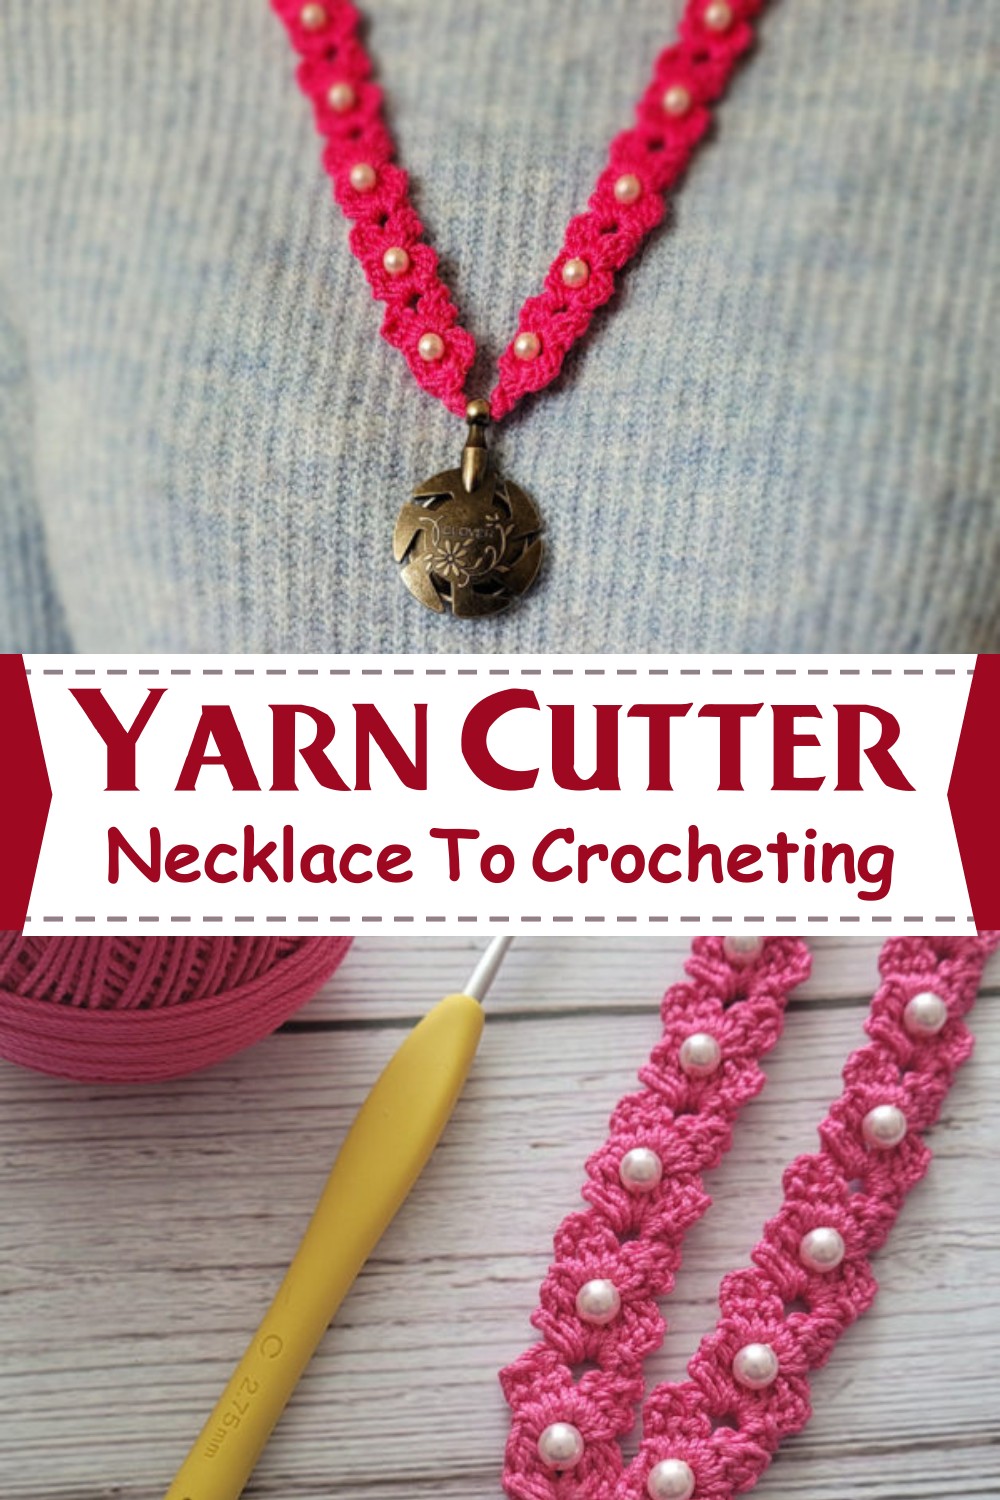 Yarn Cutter Necklace To Crocheting